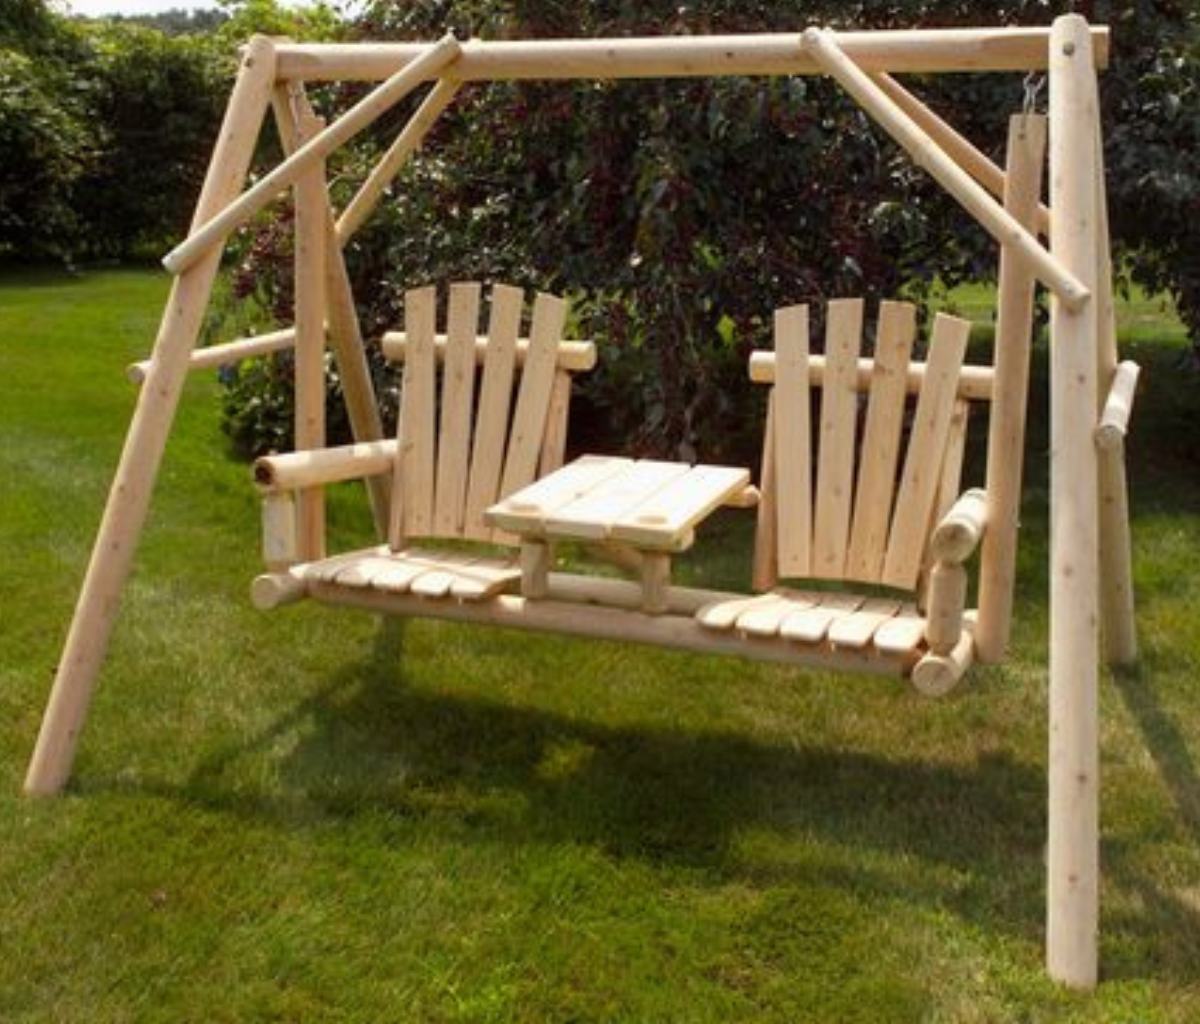 Moon Valley Rustic Cedar Log Tete-a-Tete Yard Swing Unfinished / No Thanks